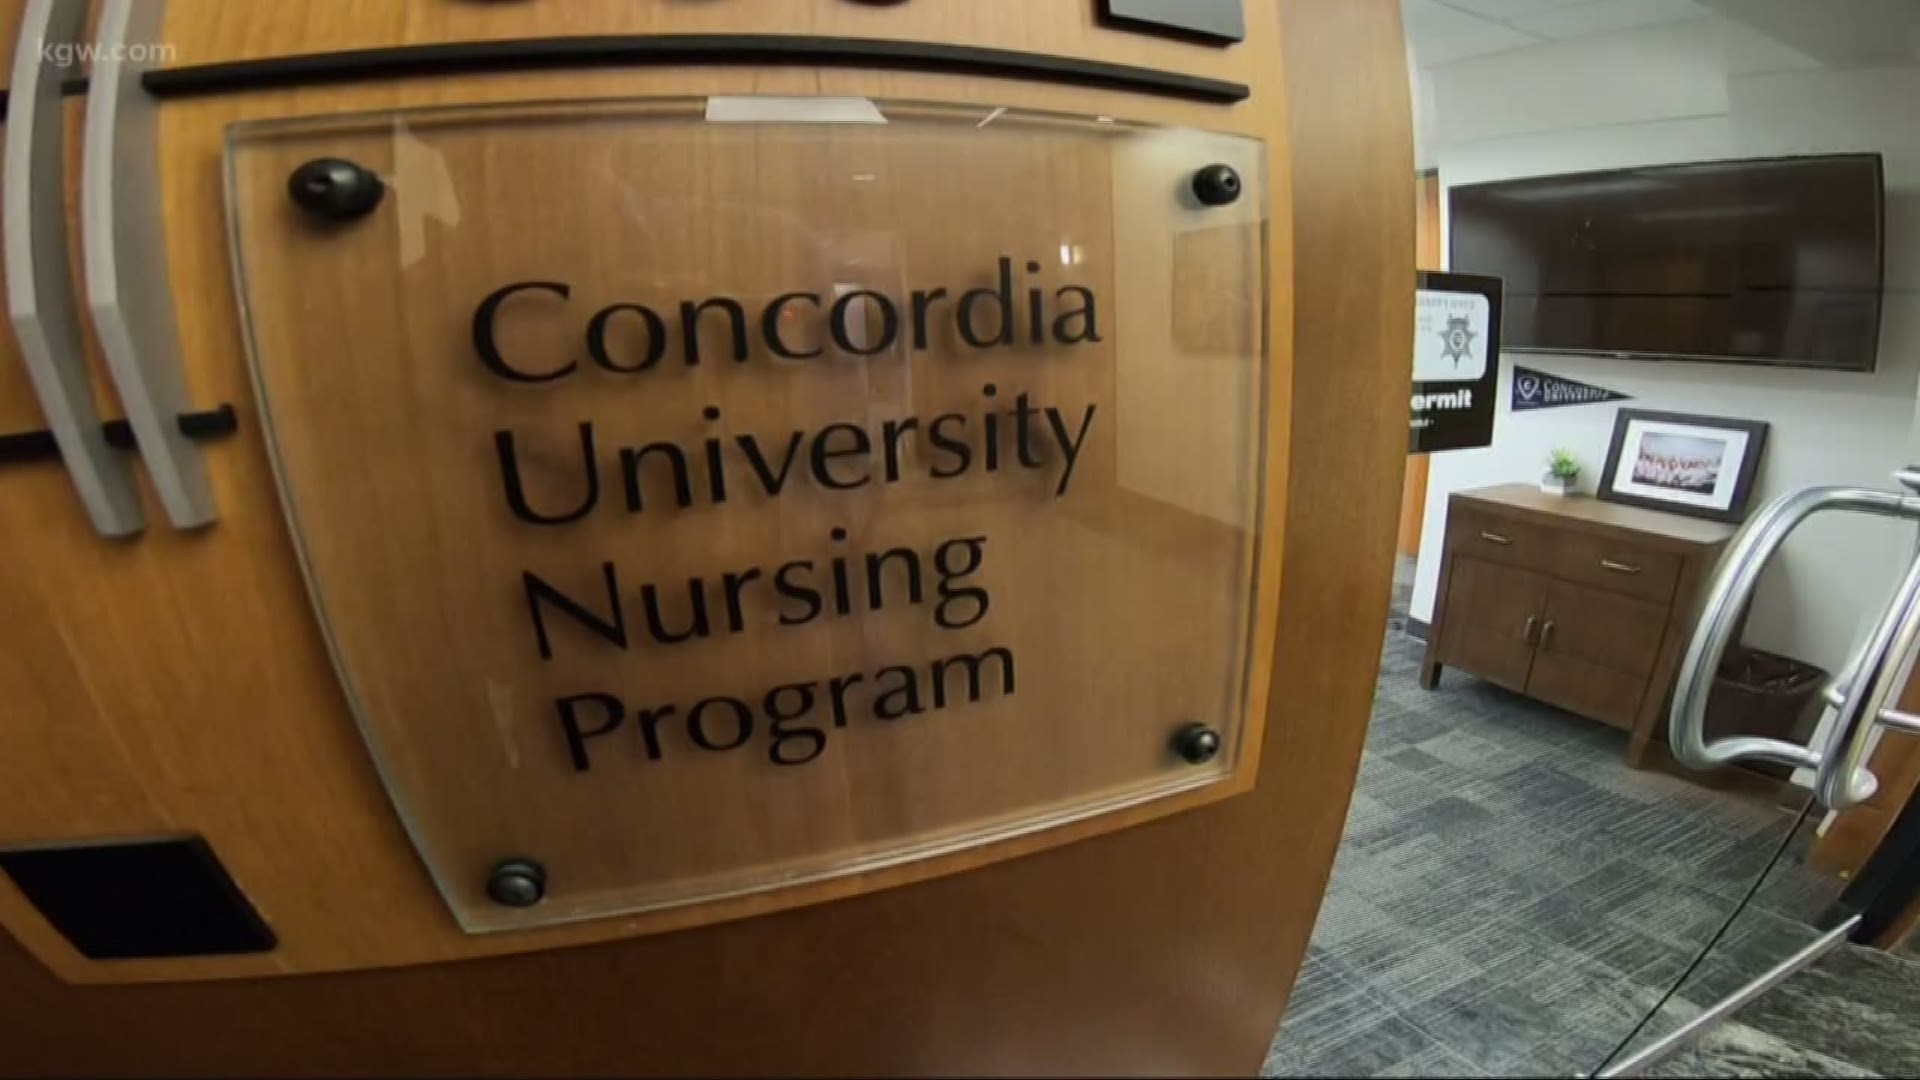 Concordia University-Saint Paul (Minn.) will absorb Portland's program, allowing current and future nursing students to complete their studies in Portland.